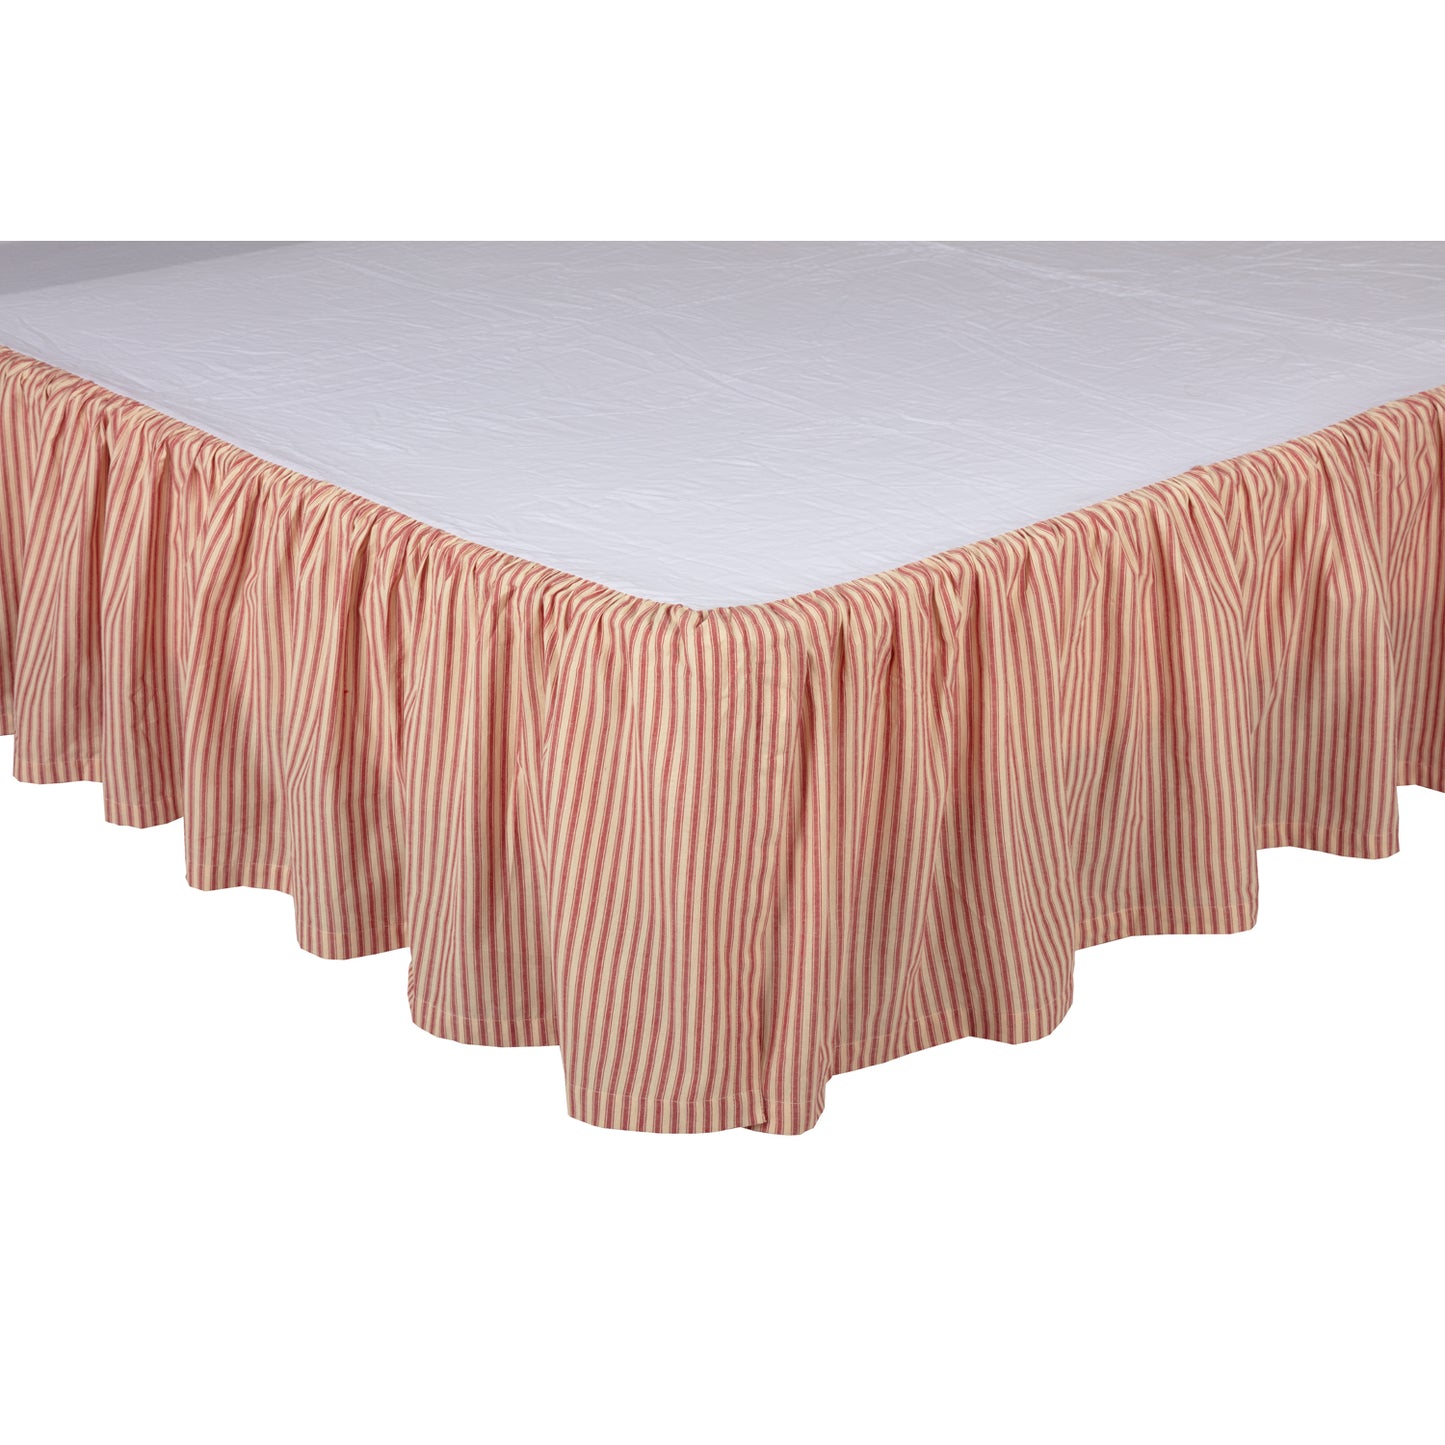 51949-Sawyer-Mill-Red-Ticking-Stripe-Queen-Bed-Skirt-60x80x16-image-4